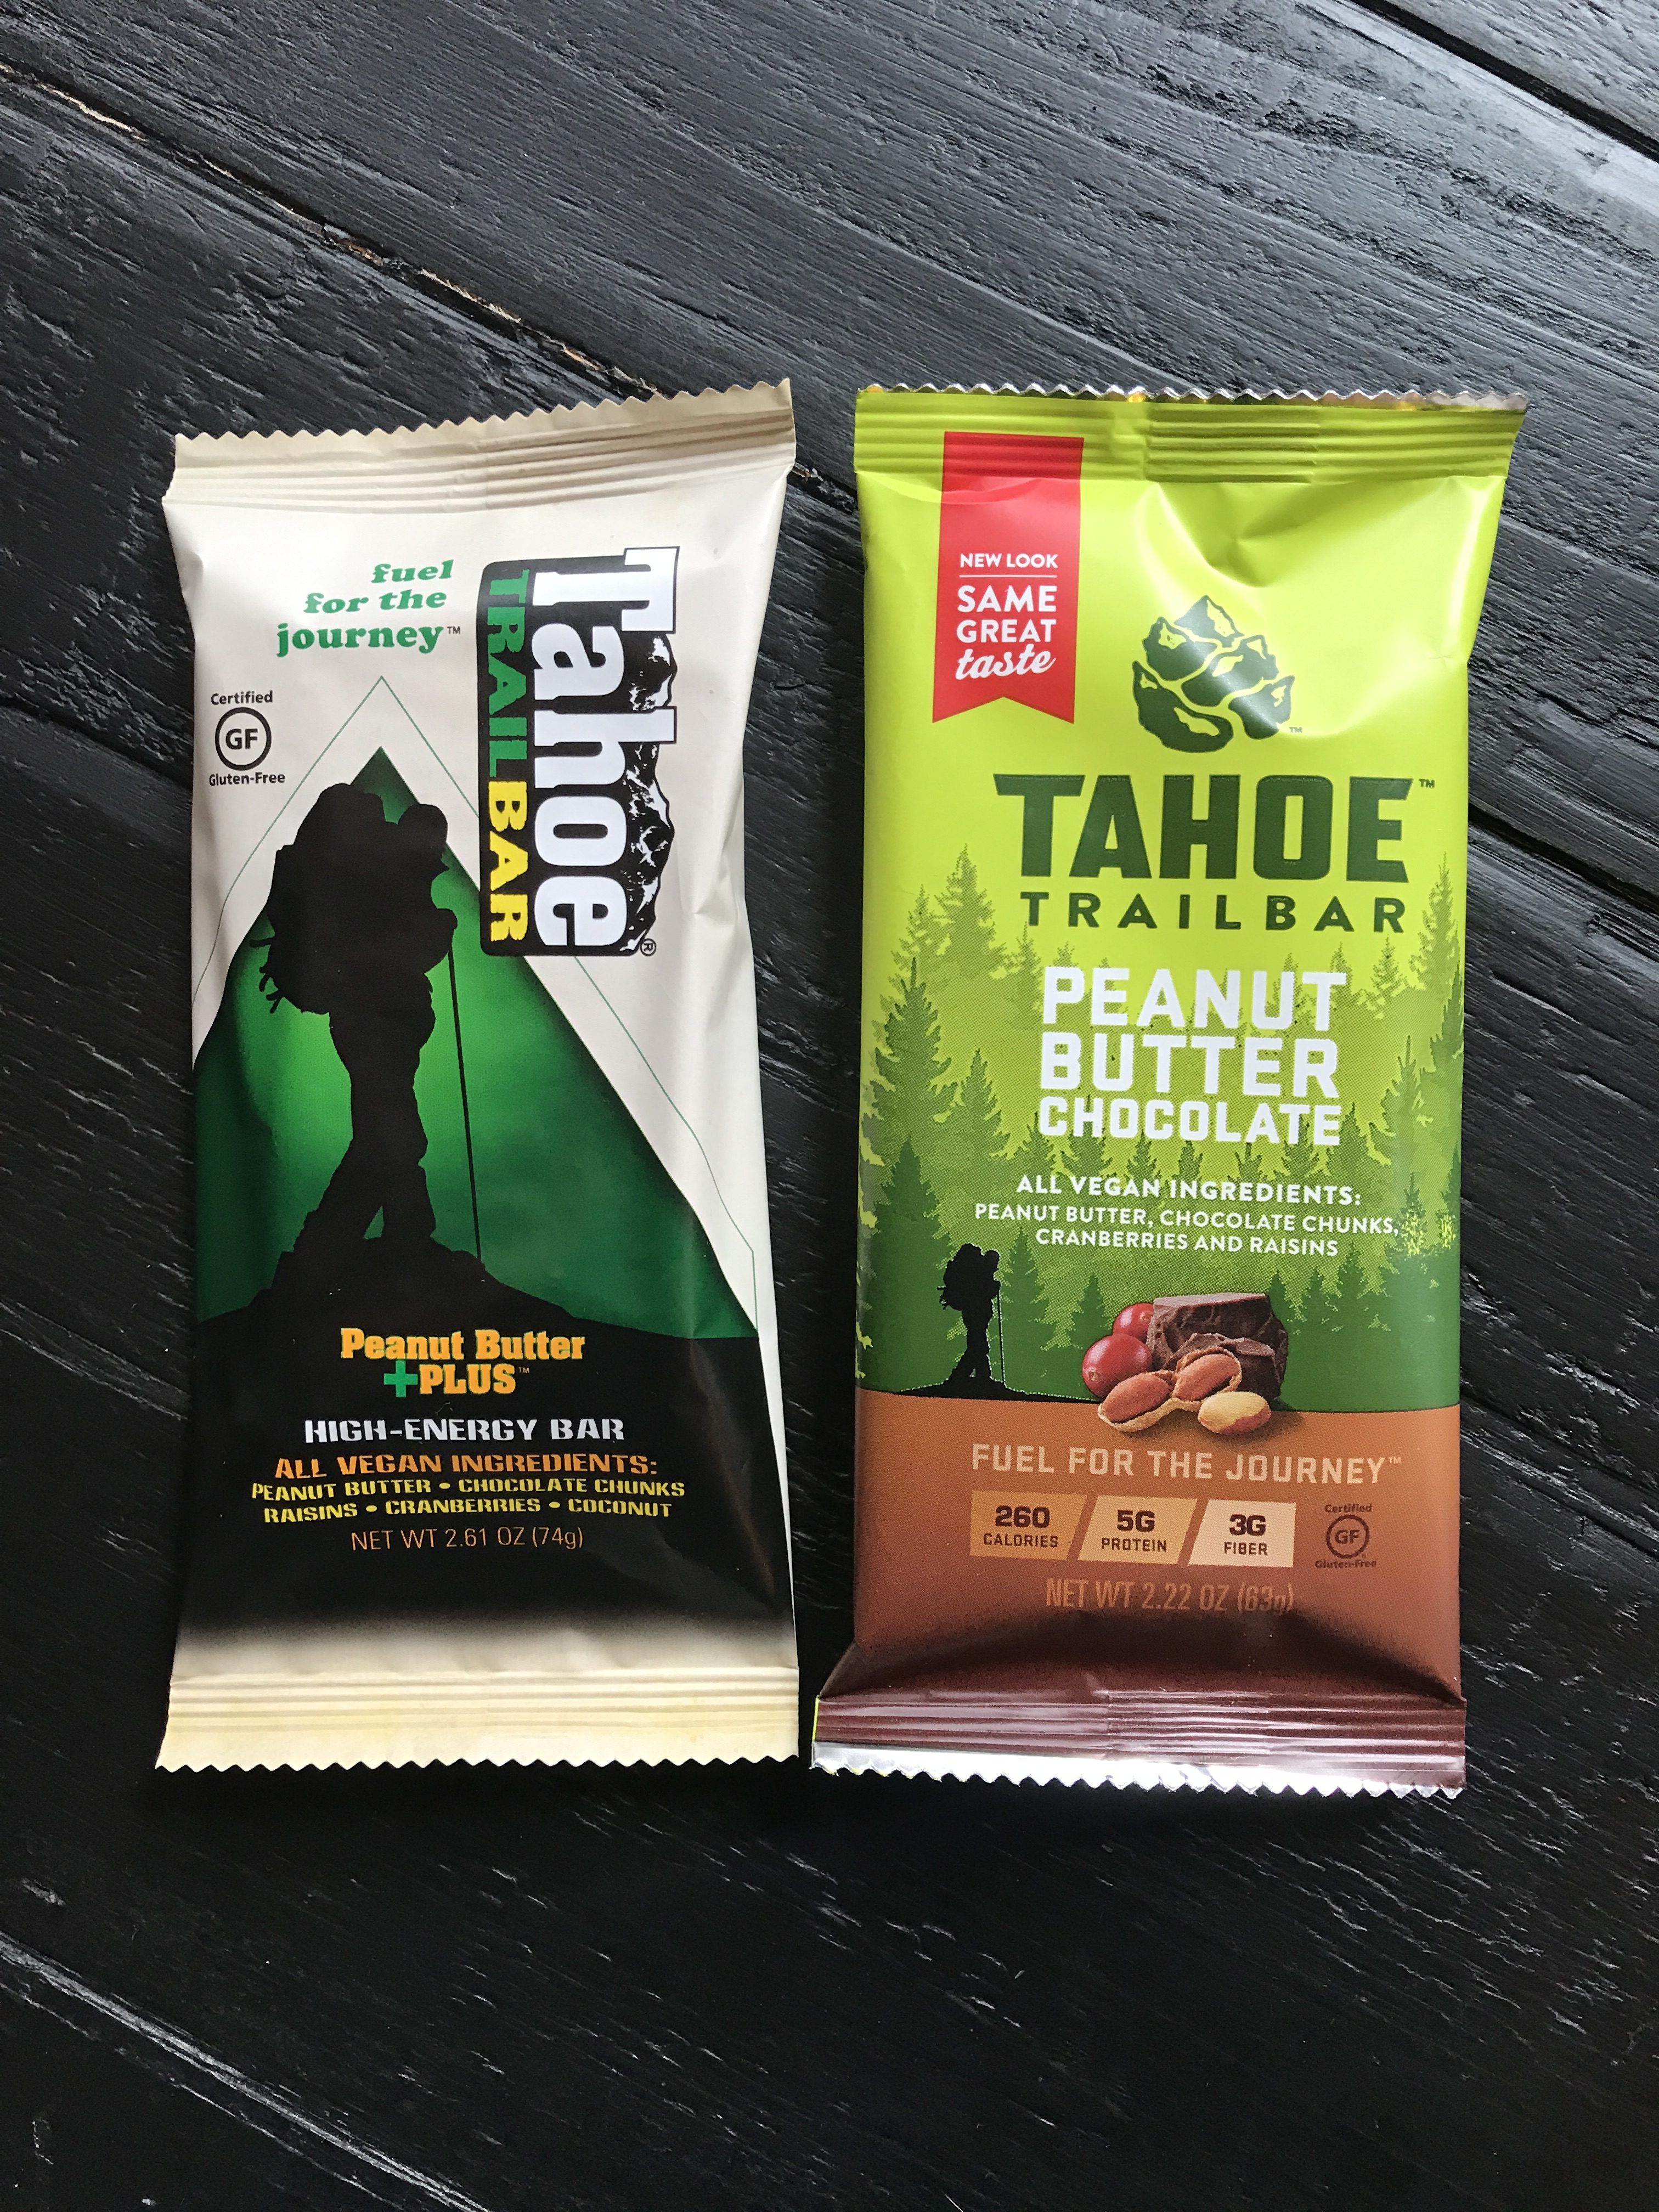 who designed tahoe trail bar packaging